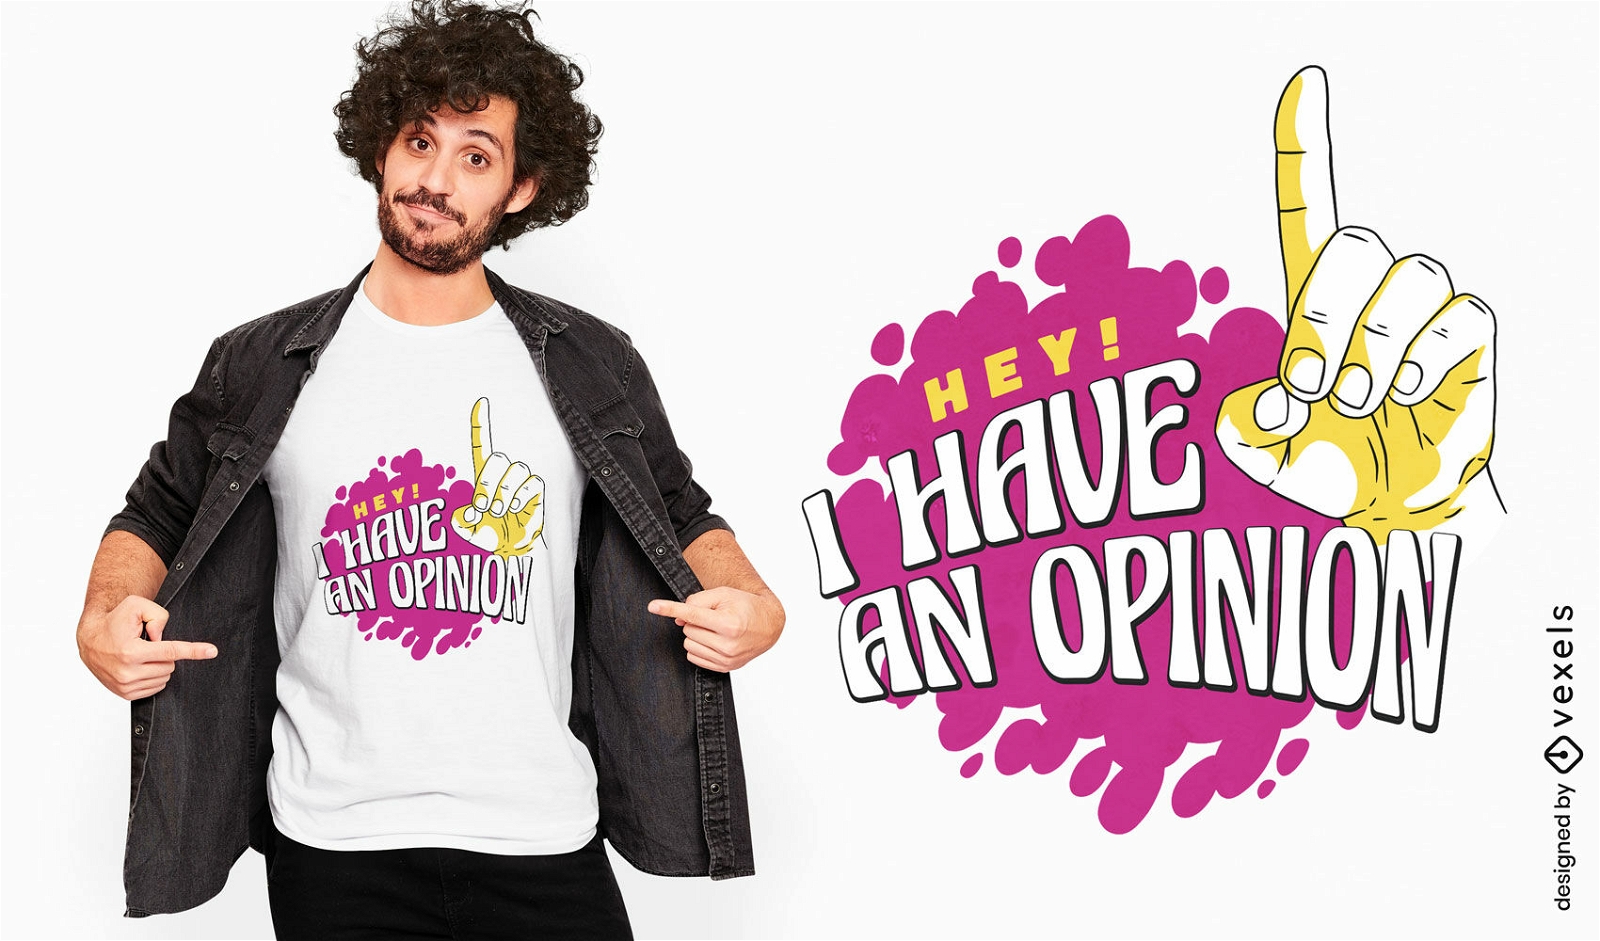 I have an opinion funny quote t-shirt design